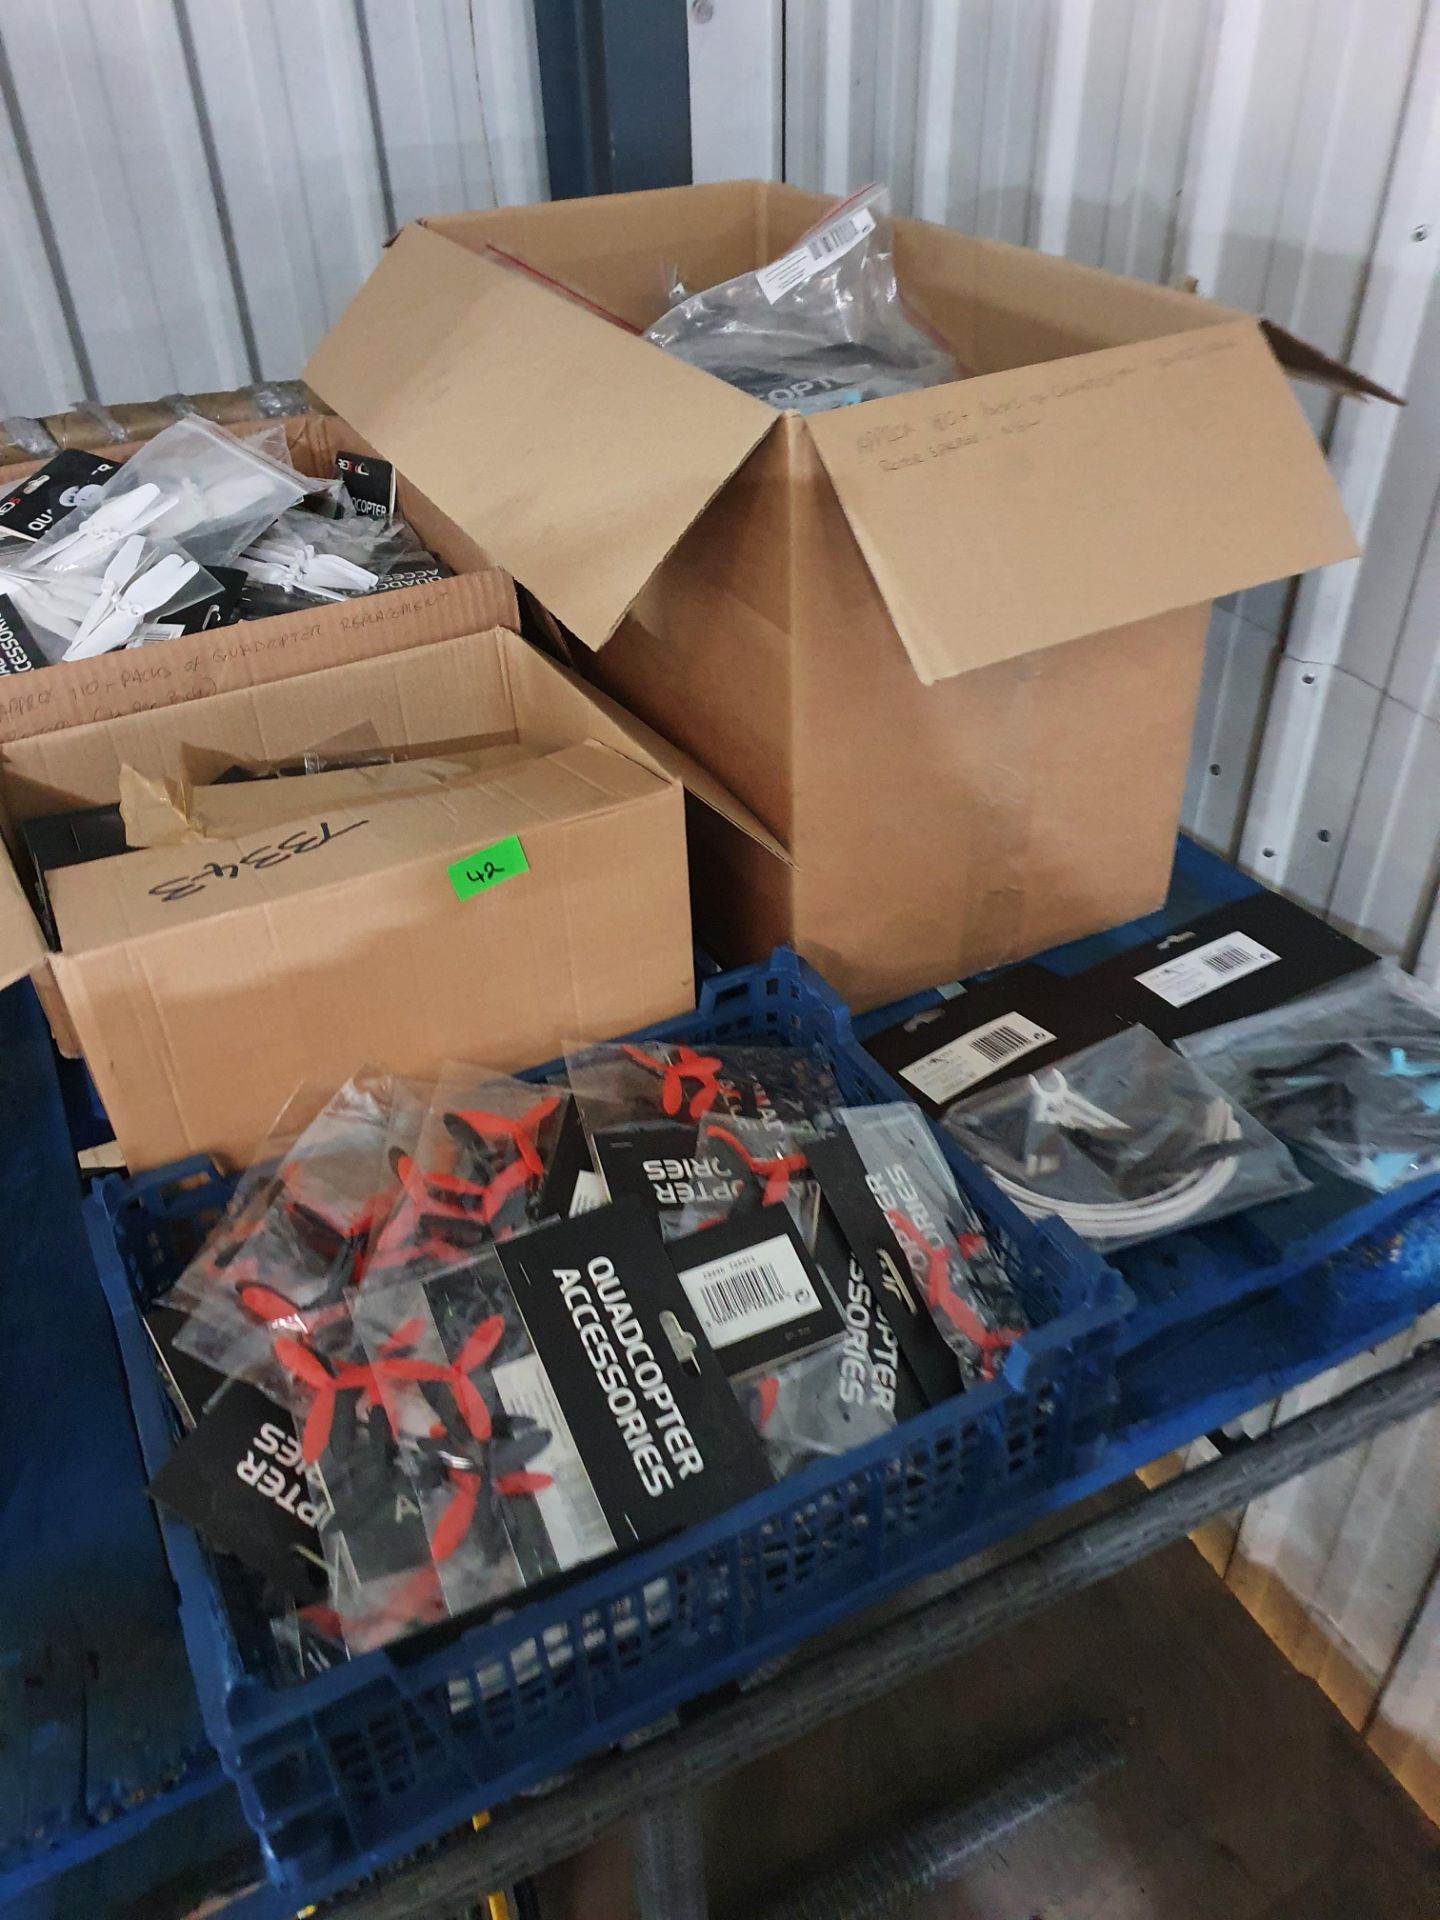 Approx 300pack of Drone & Quadcopter Rotor Spares. New Sealed. Incl FX-123 & FX-16 Units. - Image 8 of 8